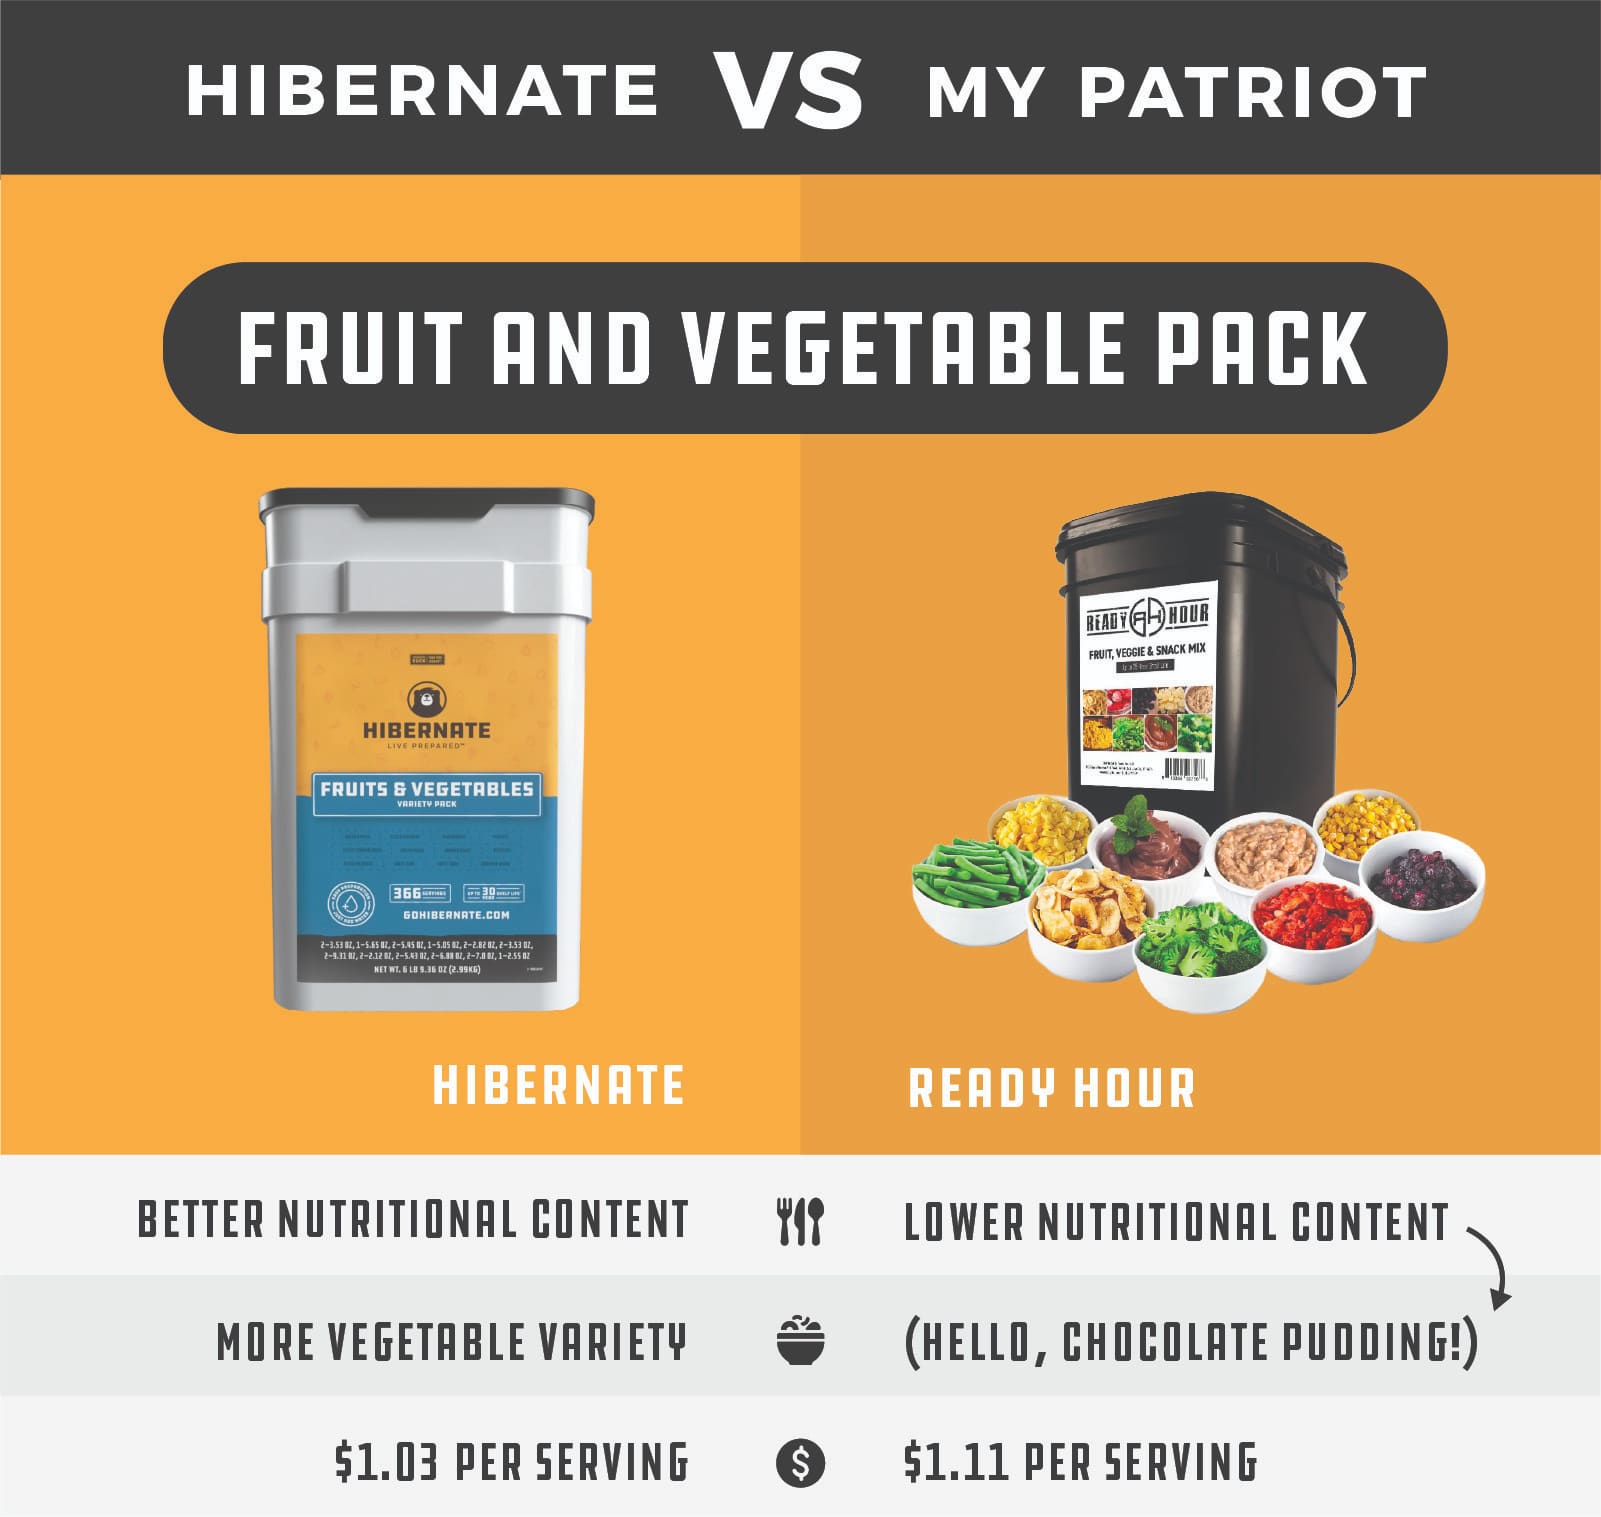 Freeze-dried fruits and vegetables are an awesome (not to mention tasty and nutrient-dense) addition to any emergency food supply